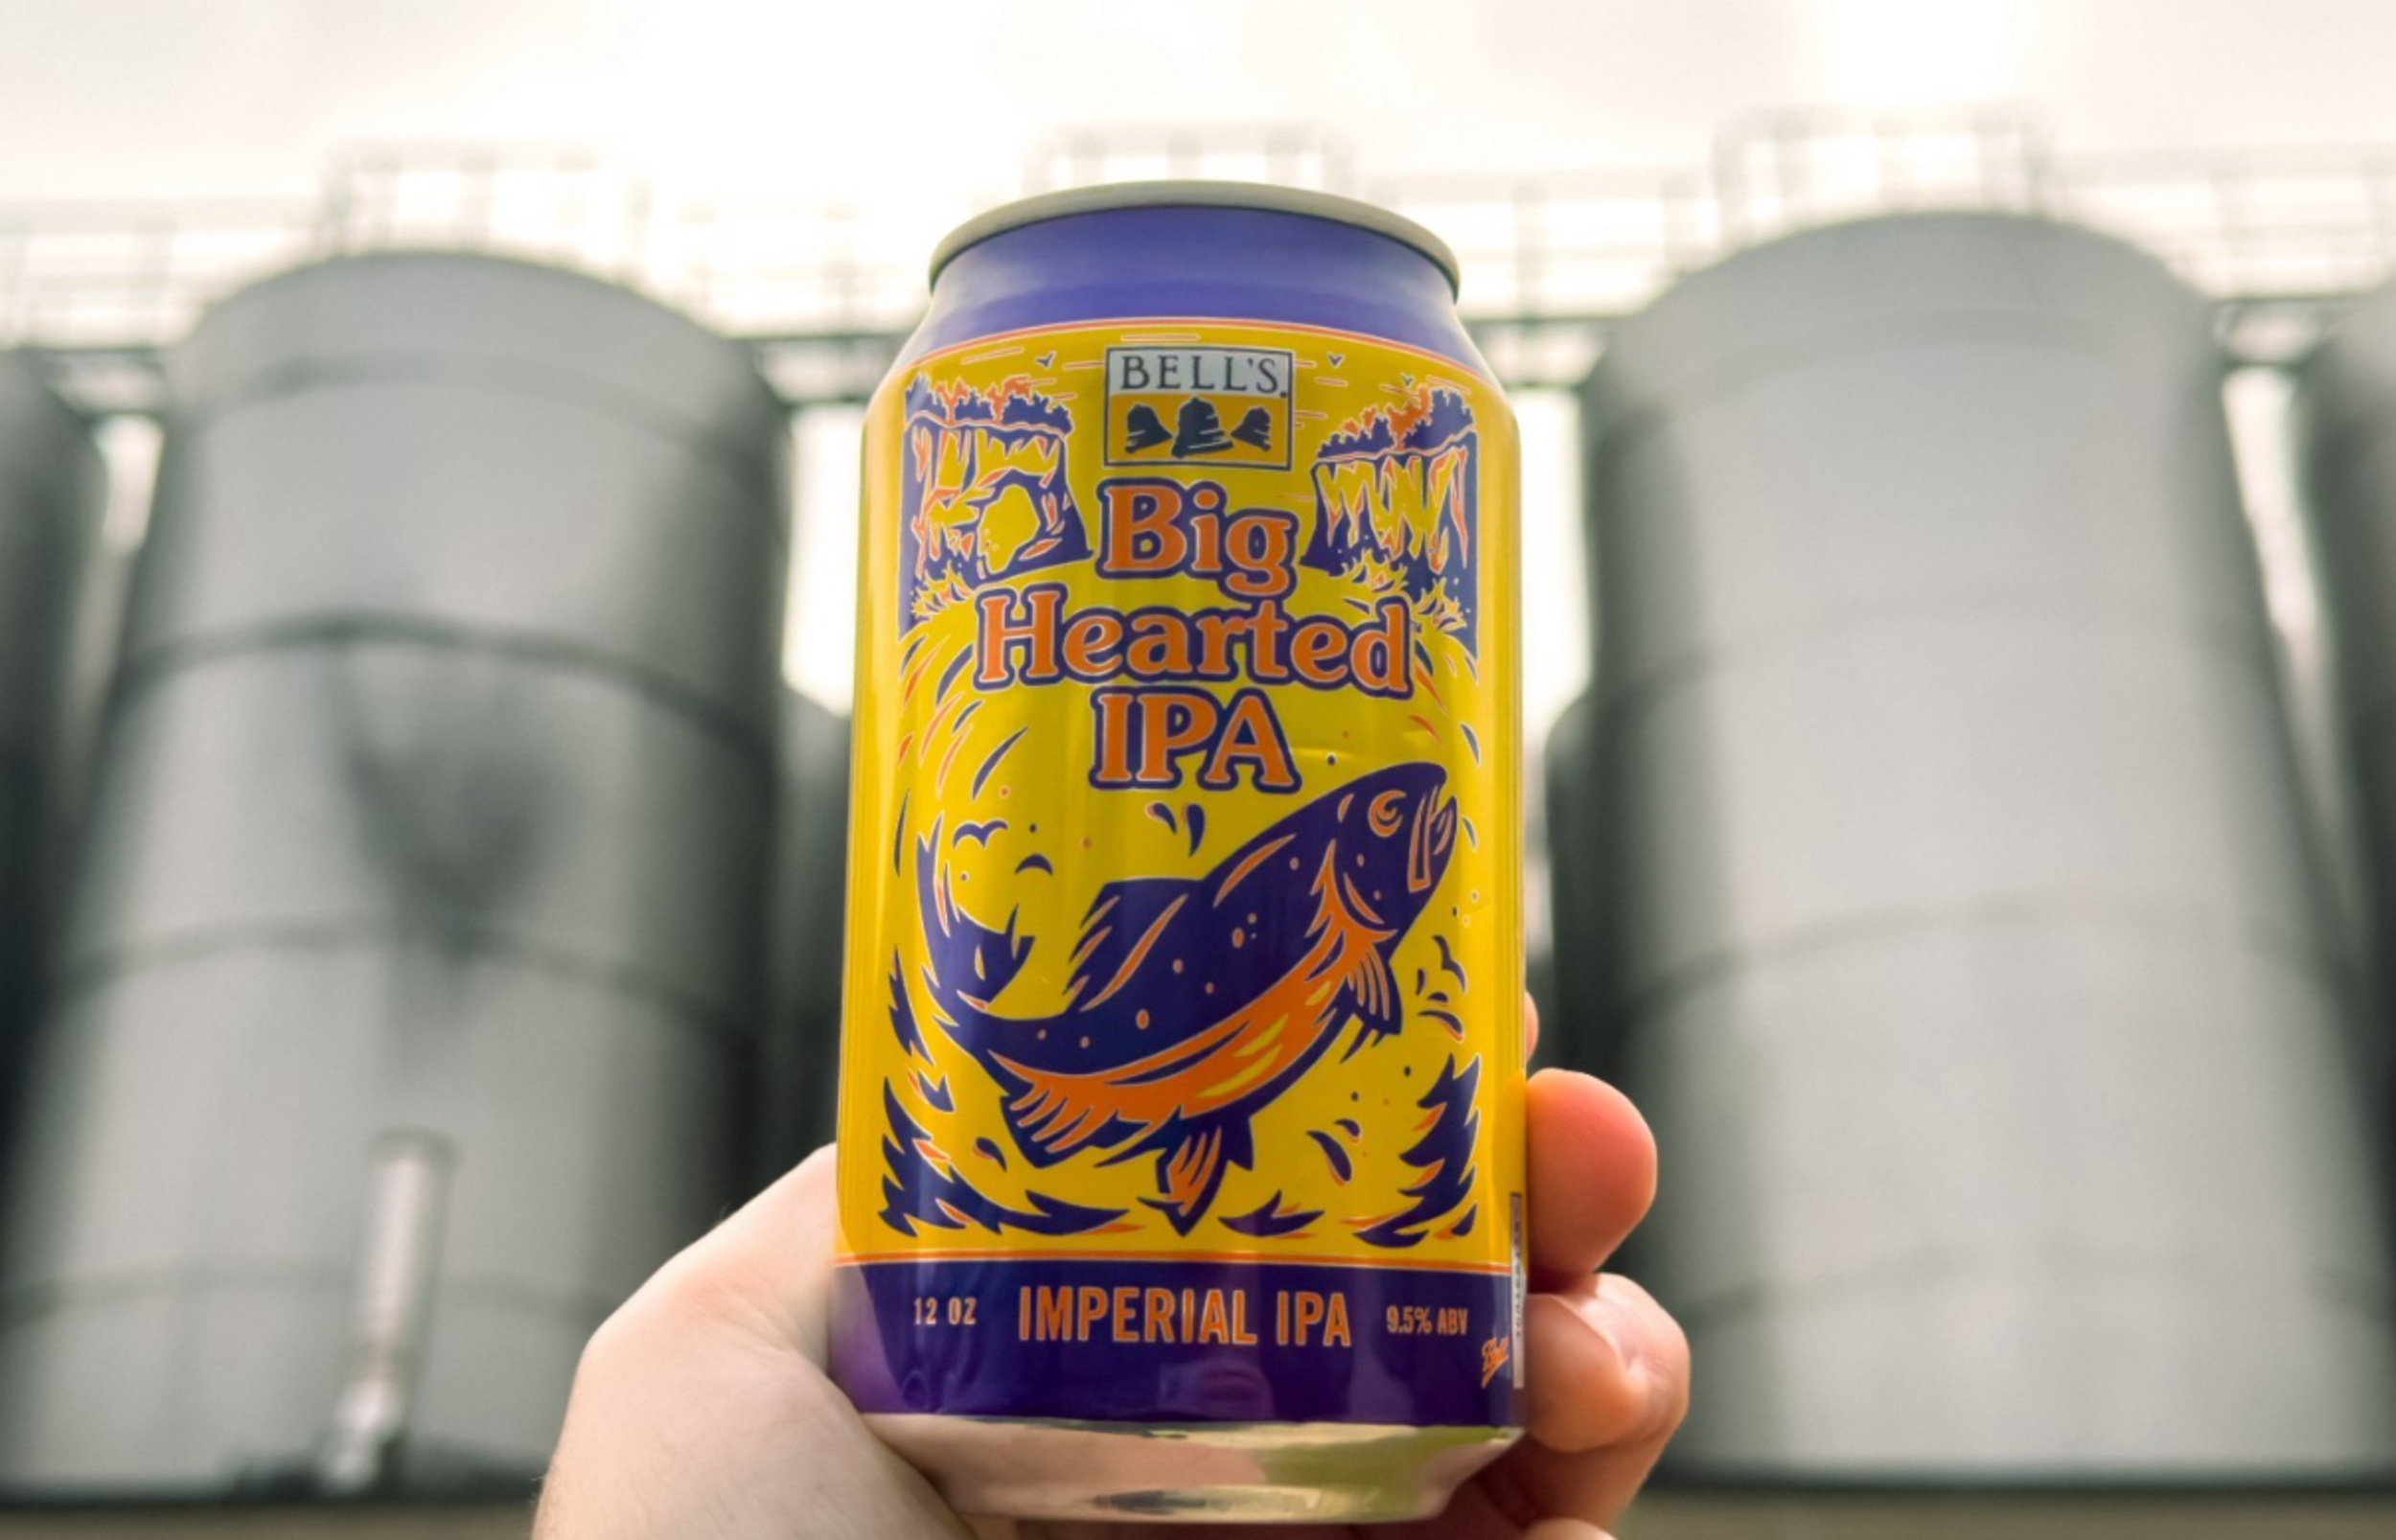 <p>Michigan is home to some major players in the beer scene, and Bell's is near the top of the list. Their flagship beers feature Two Hearted IPA, Hazy Hearted IPA, and their Oberon beers. Visitors can check out their two locations in the state, including where it all began in Kalamazoo. </p><p><a href='https://www.msn.com/en-us/community/channel/vid-cj9pqbr0vn9in2b6ddcd8sfgpfq6x6utp44fssrv6mc2gtybw0us'>Follow us on MSN to see more of our exclusive lifestyle content.</a></p>